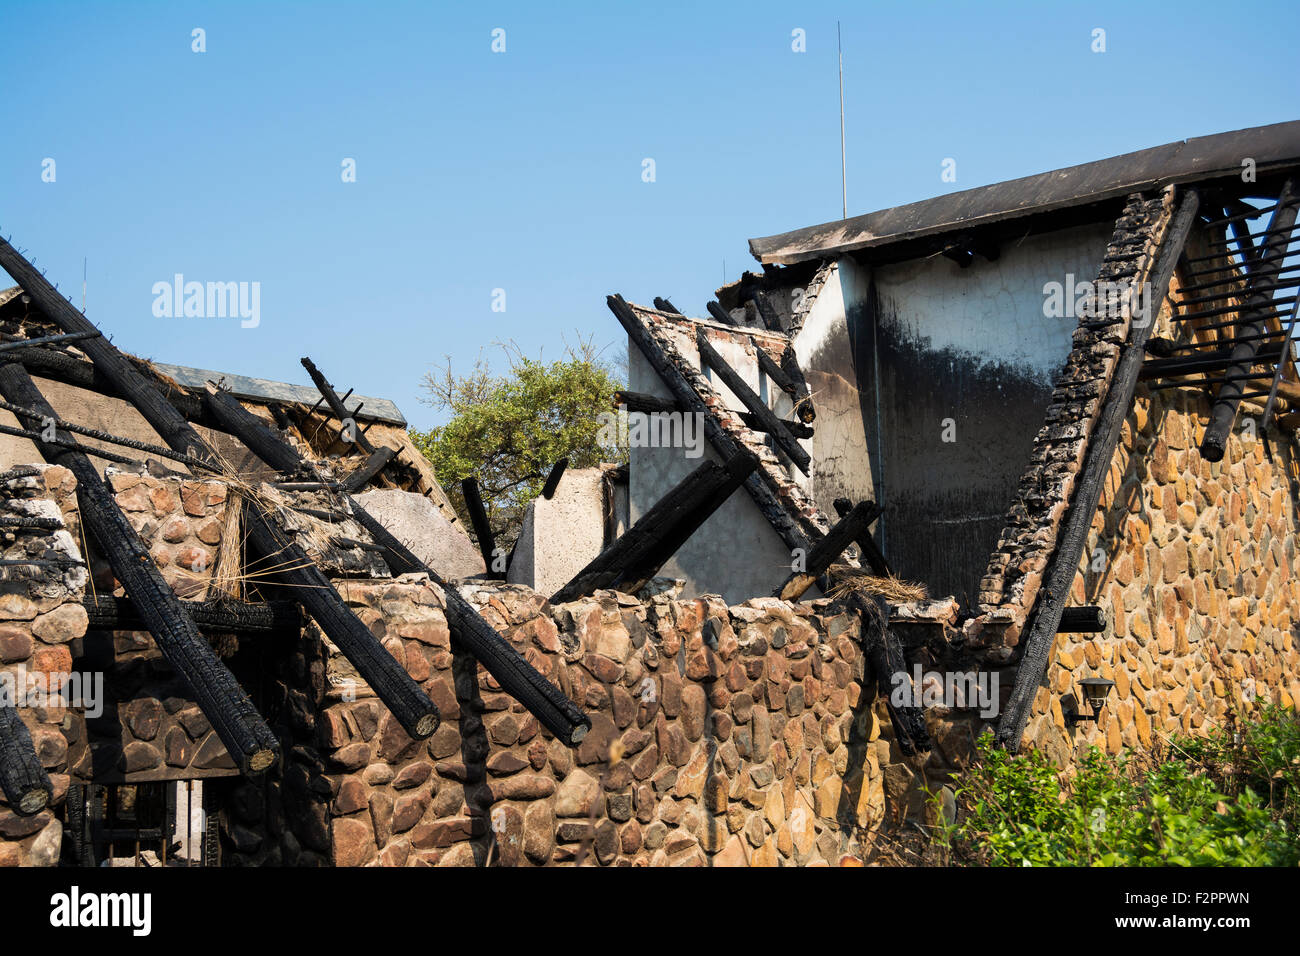 A building which has been damaged by a fire Stock Photo